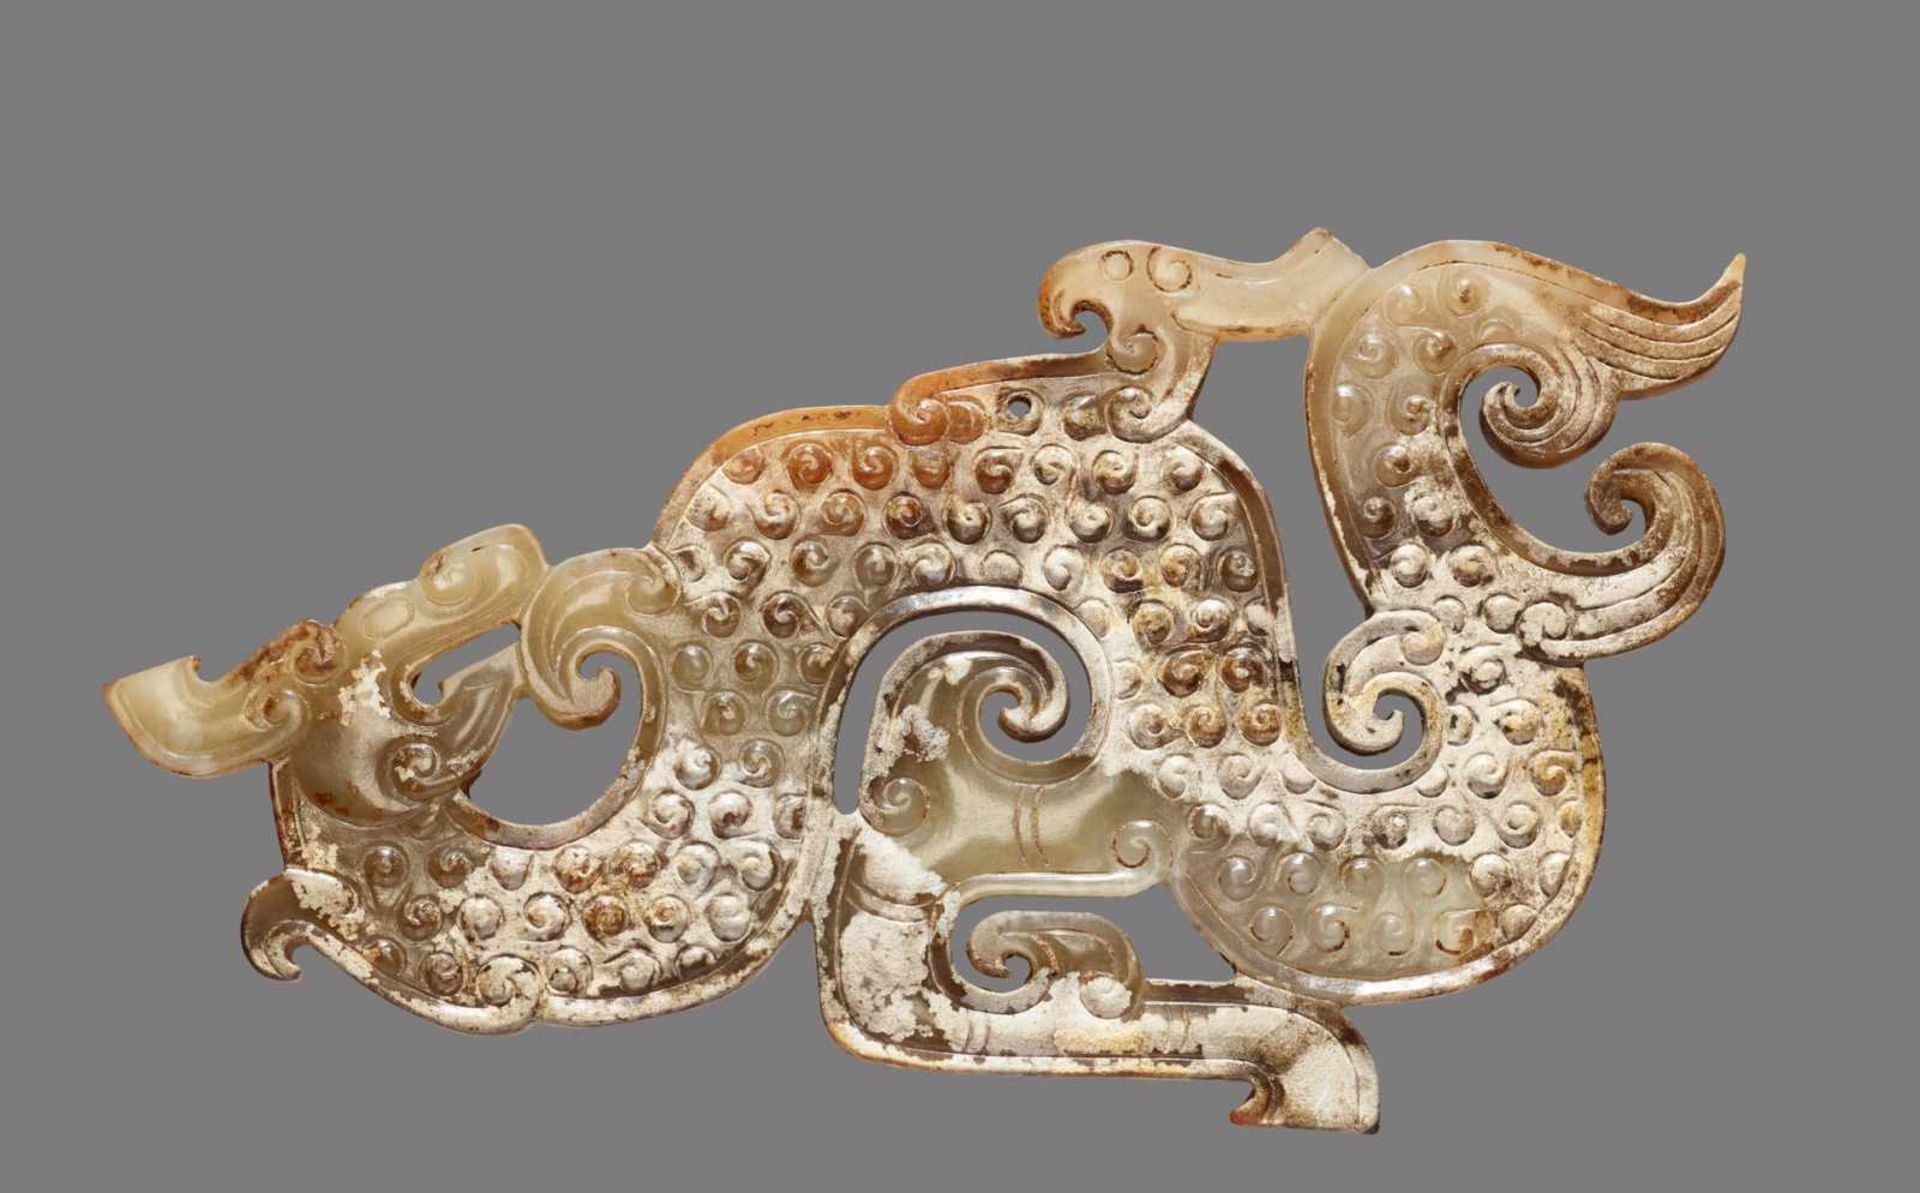 A SINUOUS S-SHAPED DRAGON WITH A PHOENIX AND CURLED APPENDAGES Jade. China, Eastern Zhou, 5th - - Bild 3 aus 10